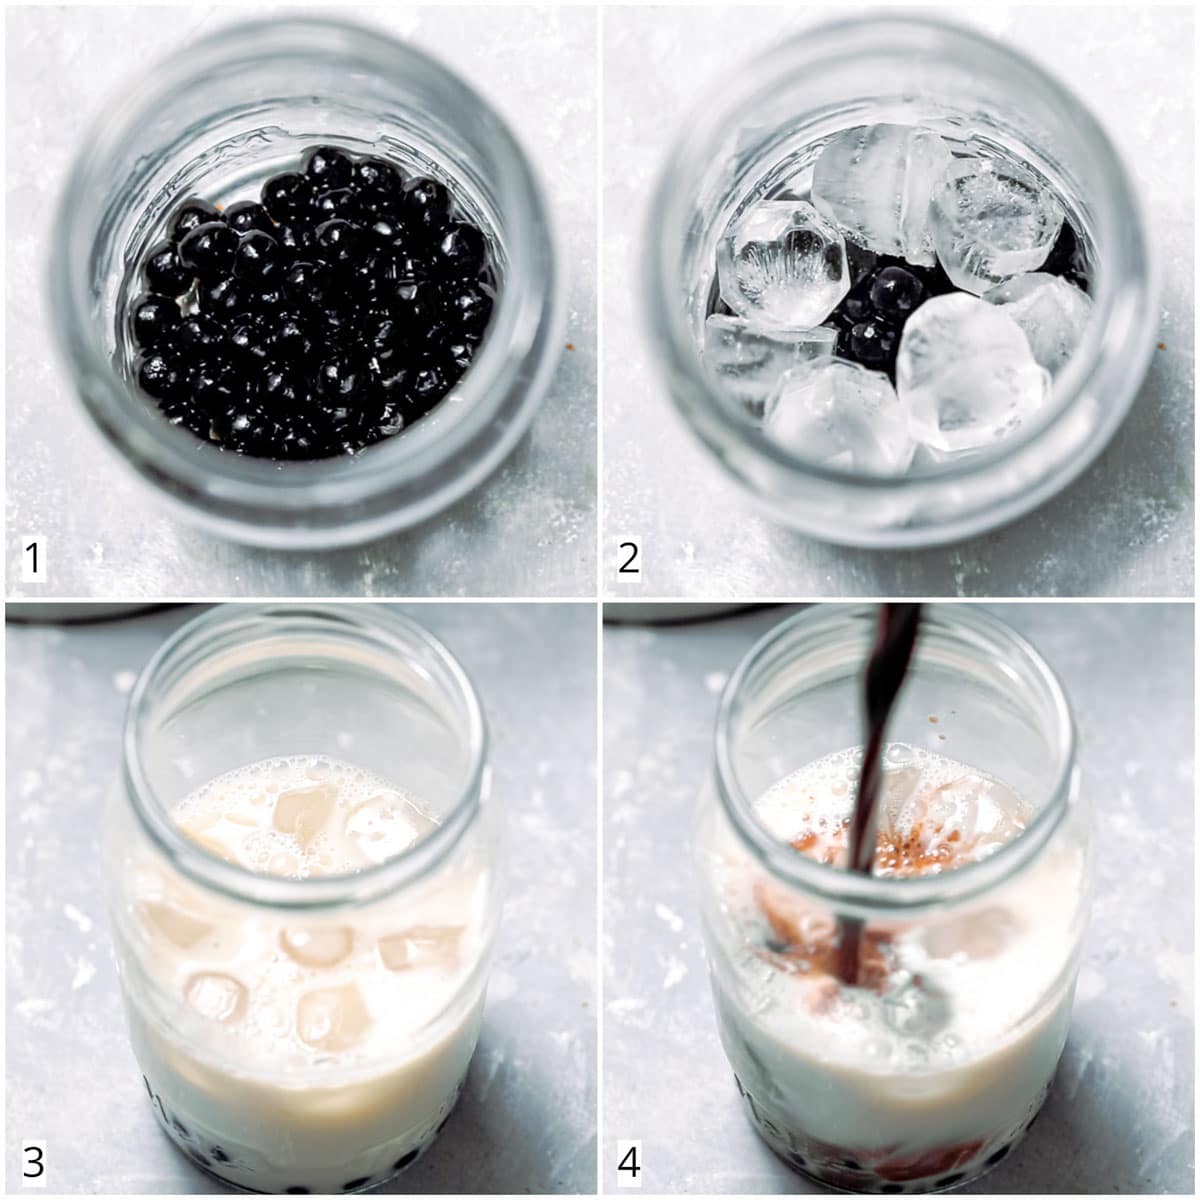 A collage of four images showing four steps to making boba tea.